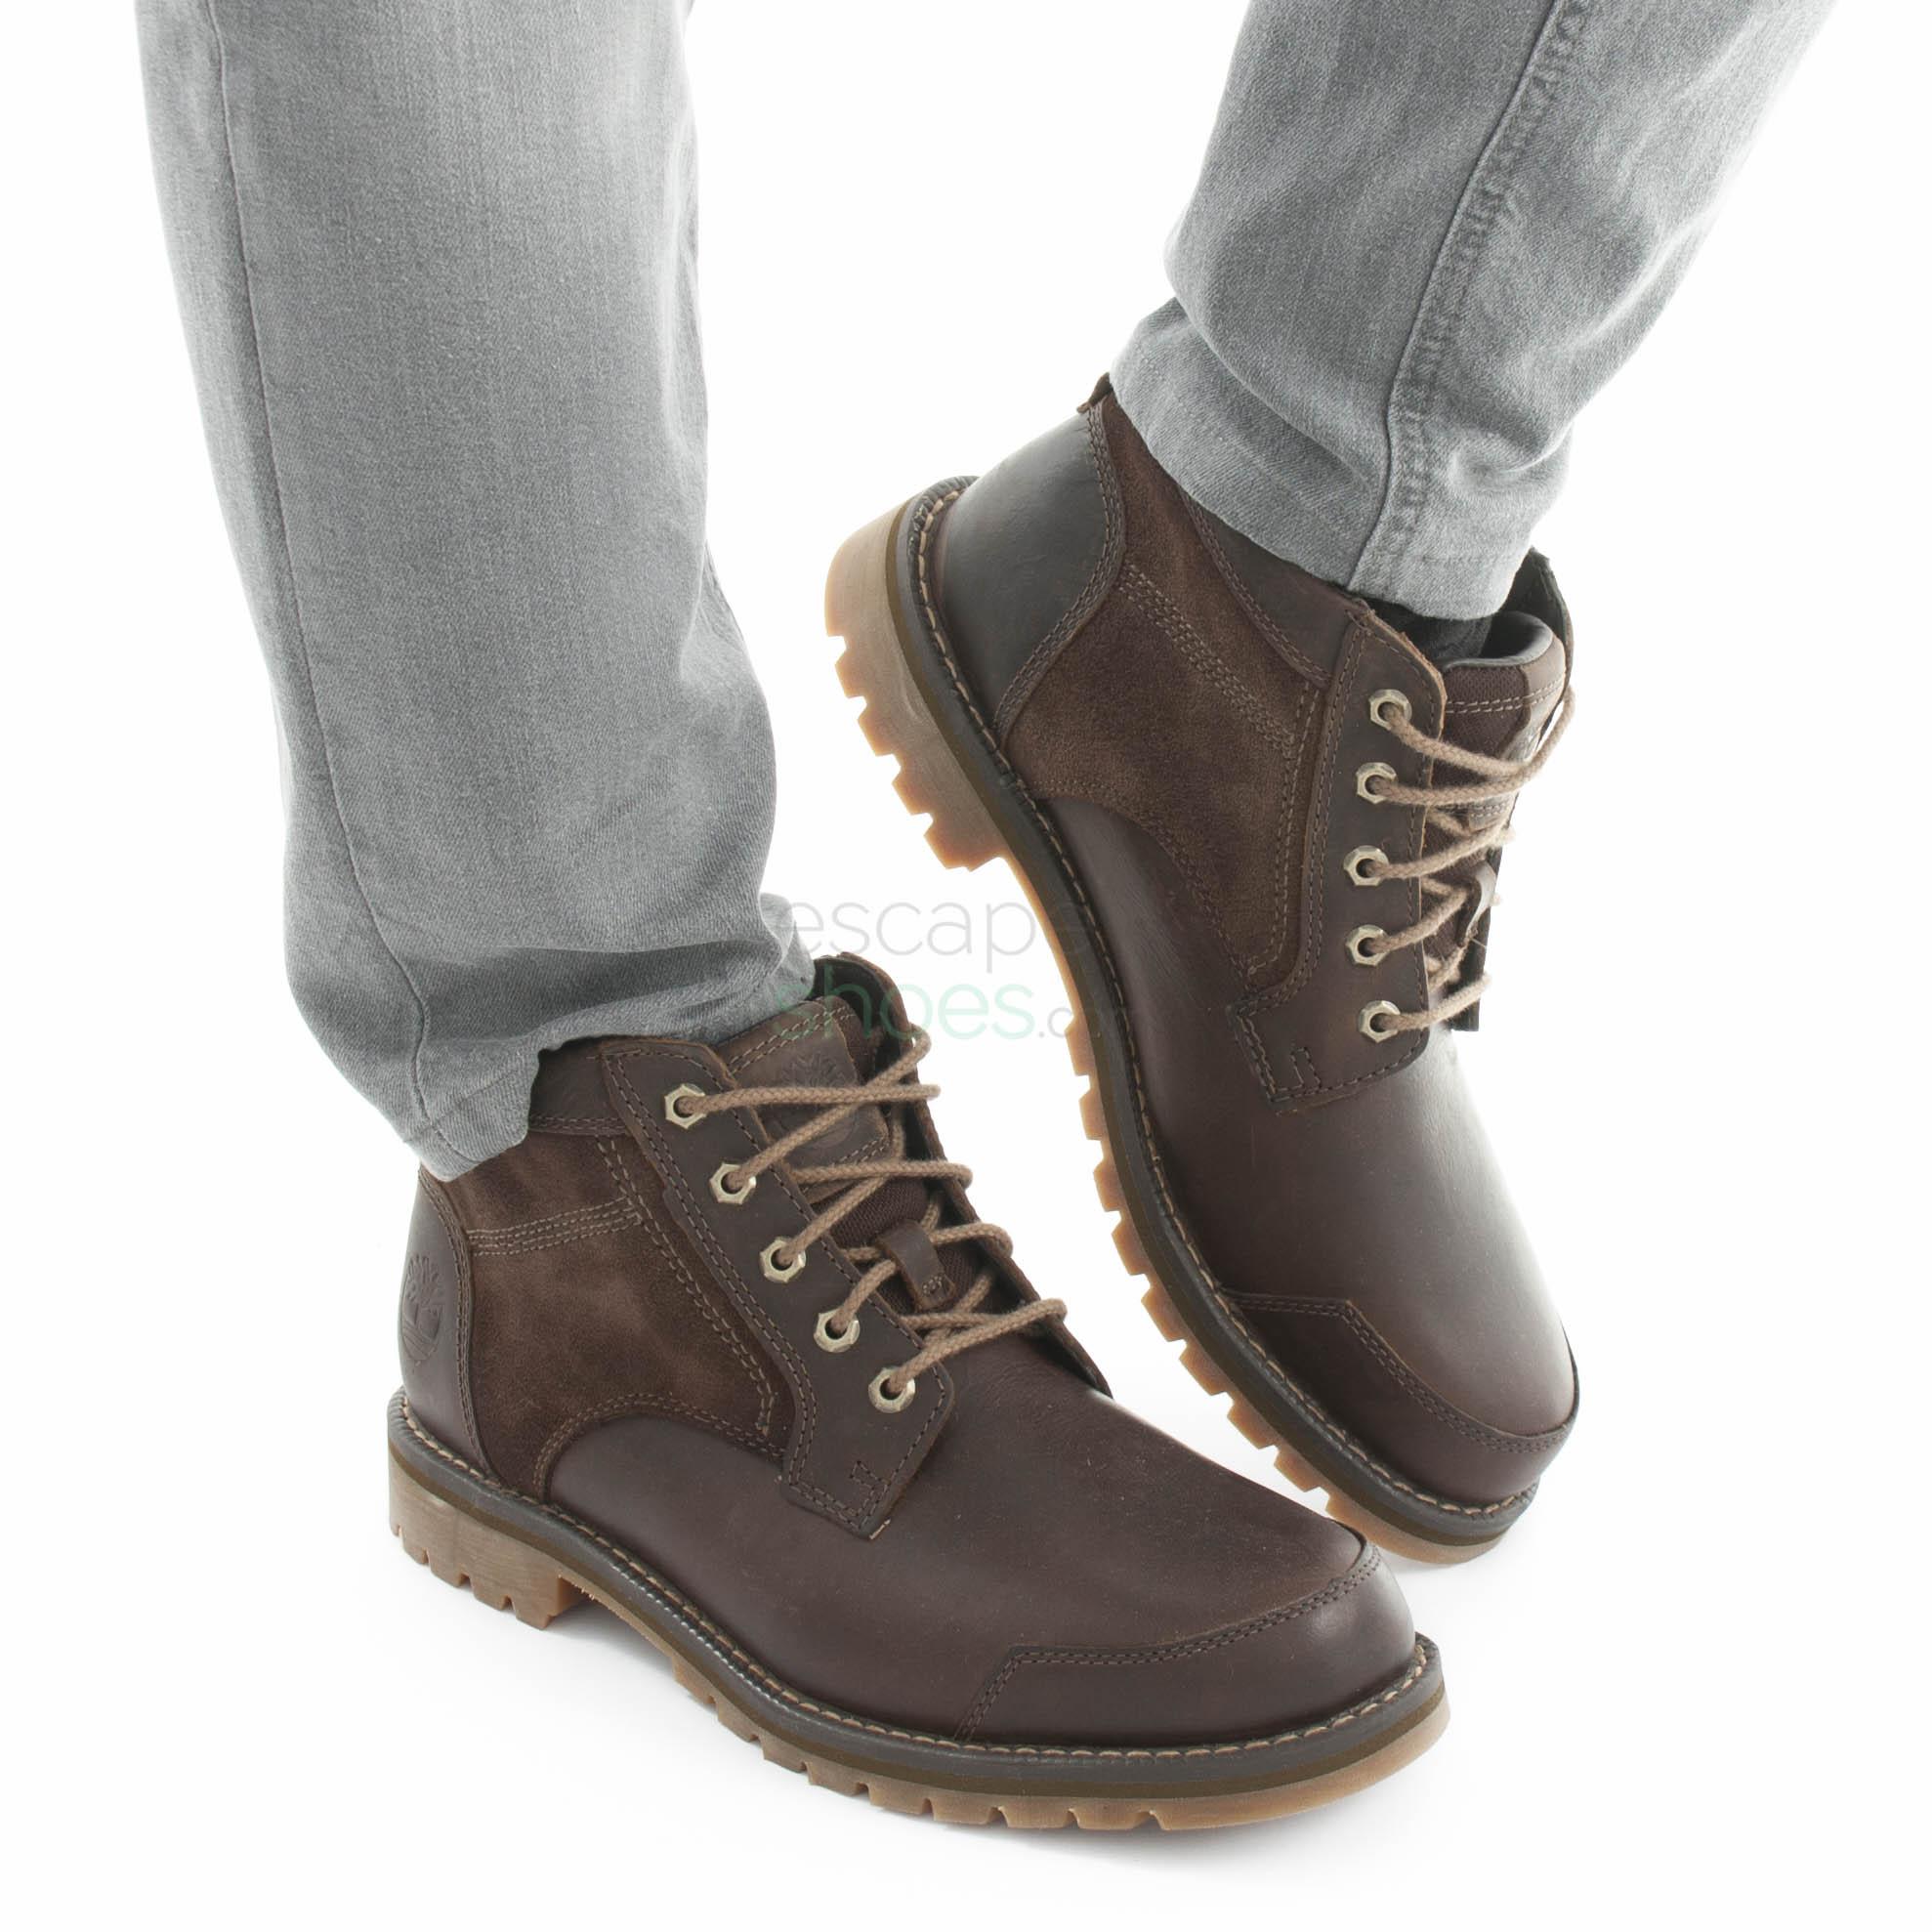 Espere superficie amplificación Timberland Larchmont Chukka Medium Brown Top Sellers, SAVE 56% -  aveclumiere.com